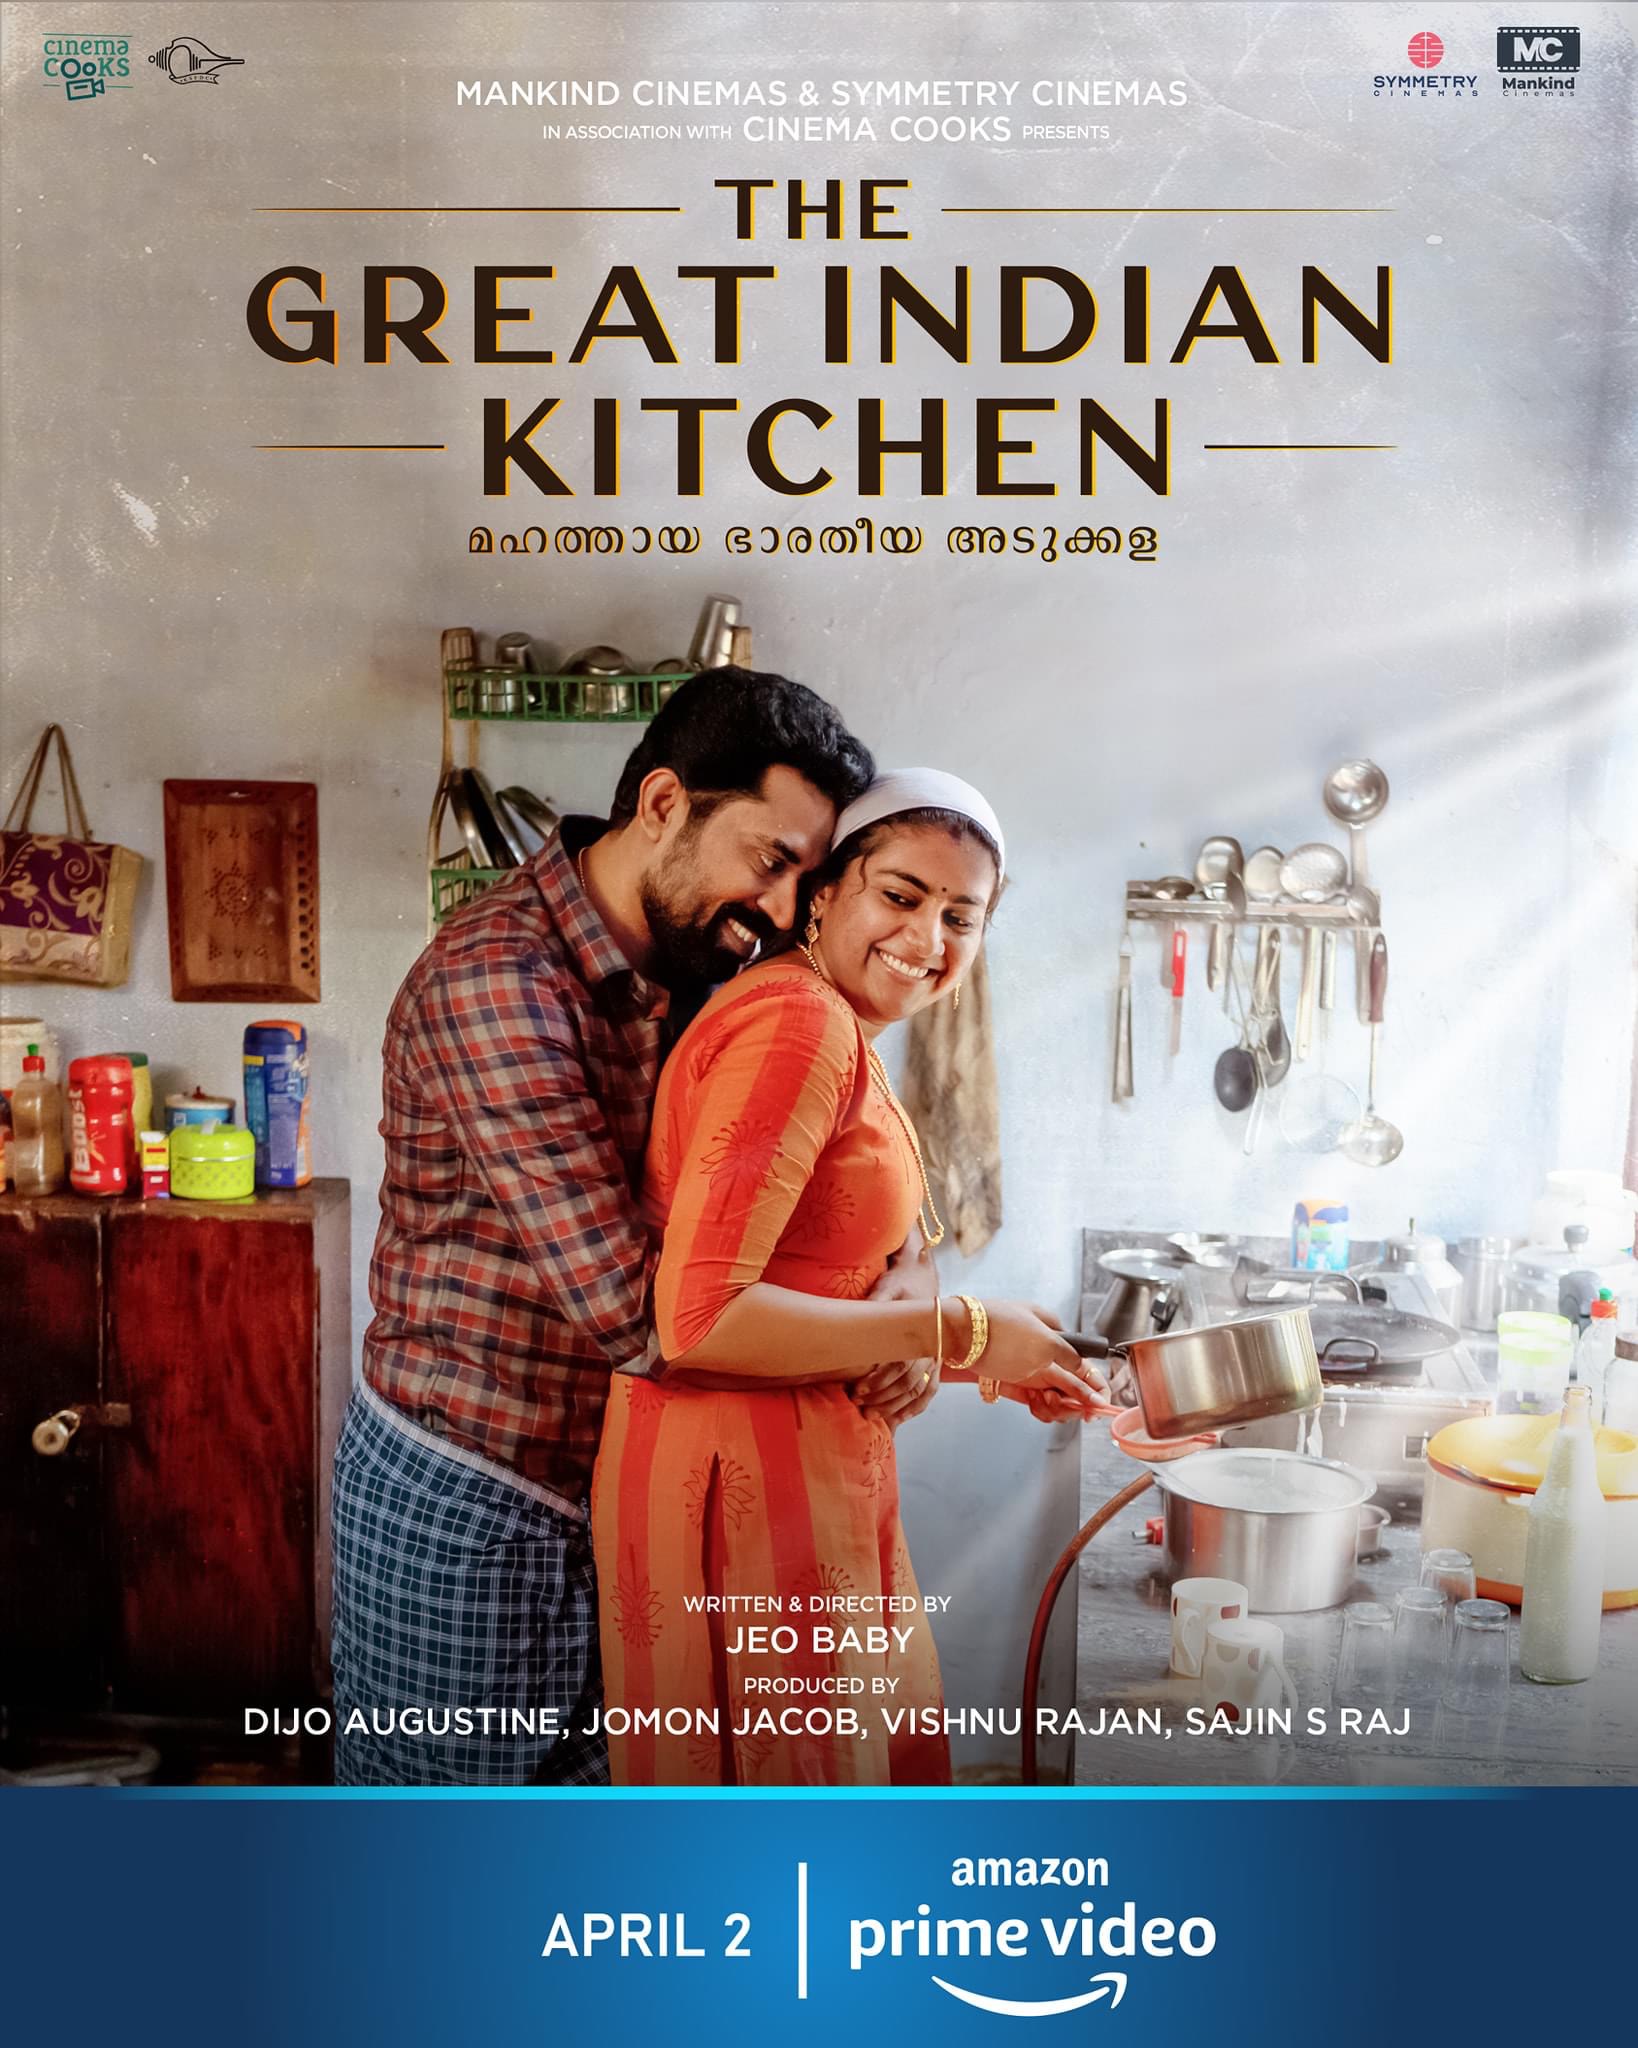 The Great Indian Kitchen (2021) Hindi Dubbad 720p HDRip 800MB Download